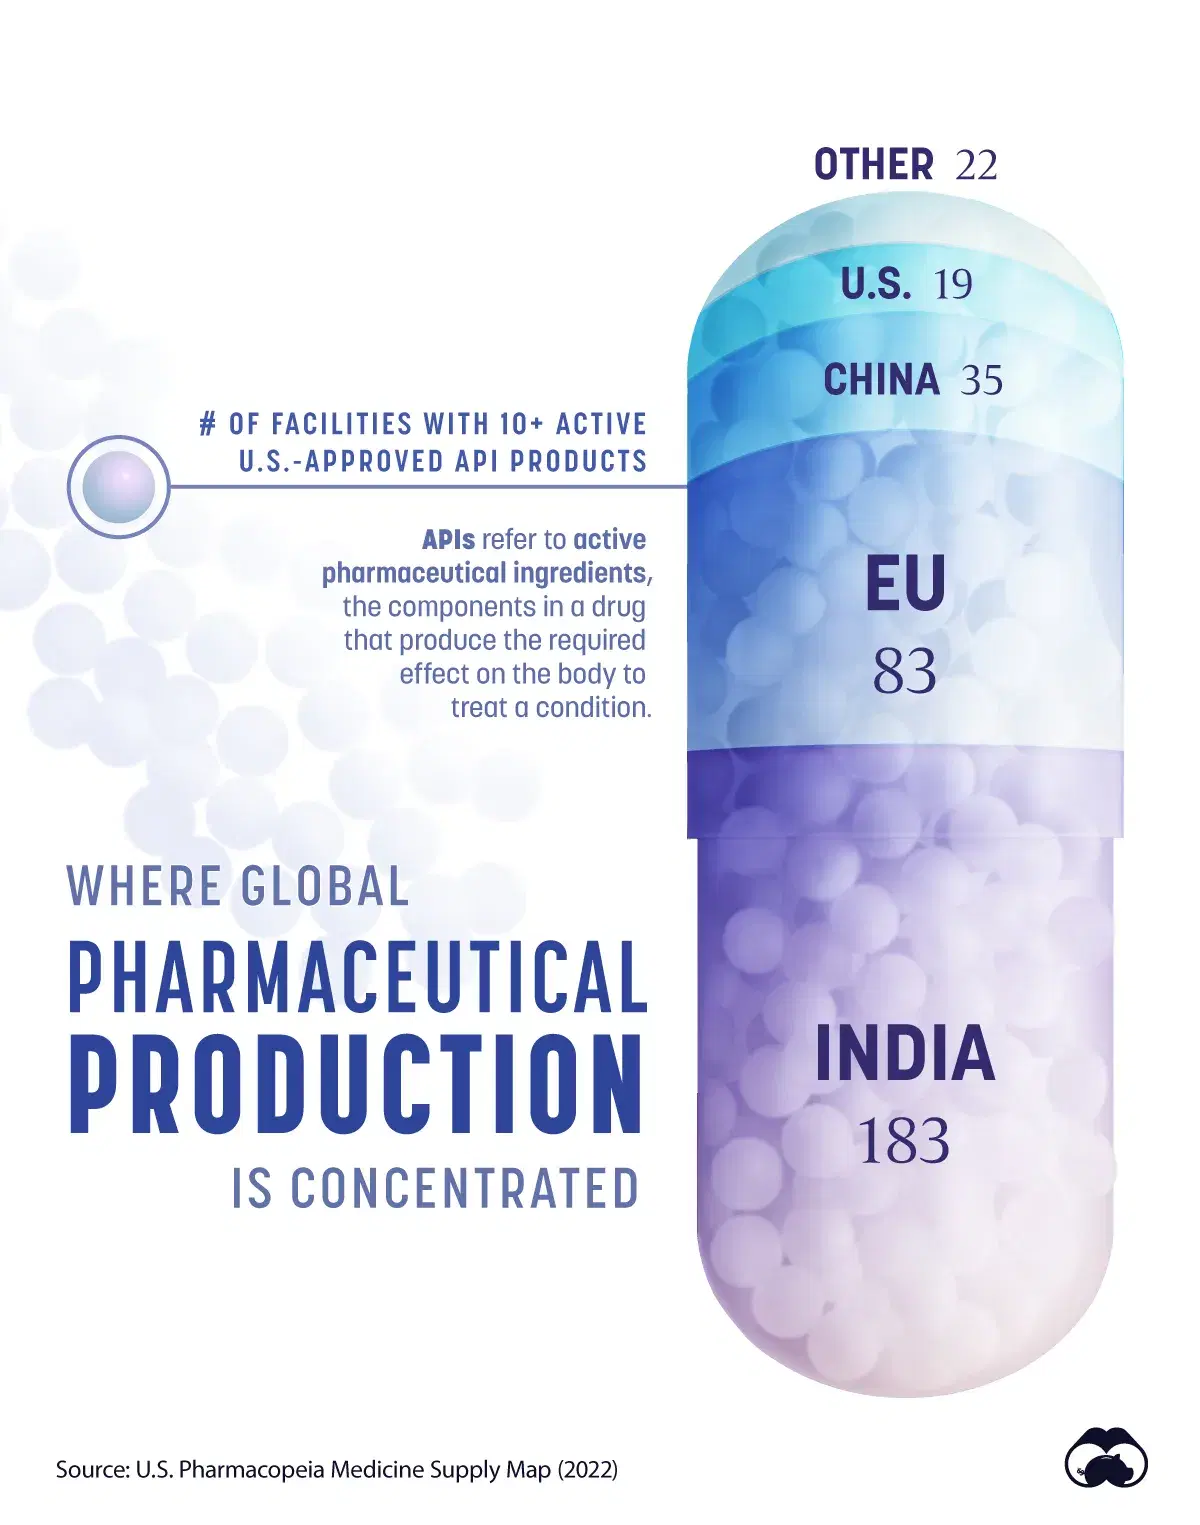 India Plays a Major Role in the World’s Pharmaceutical Supply Chain 🧬